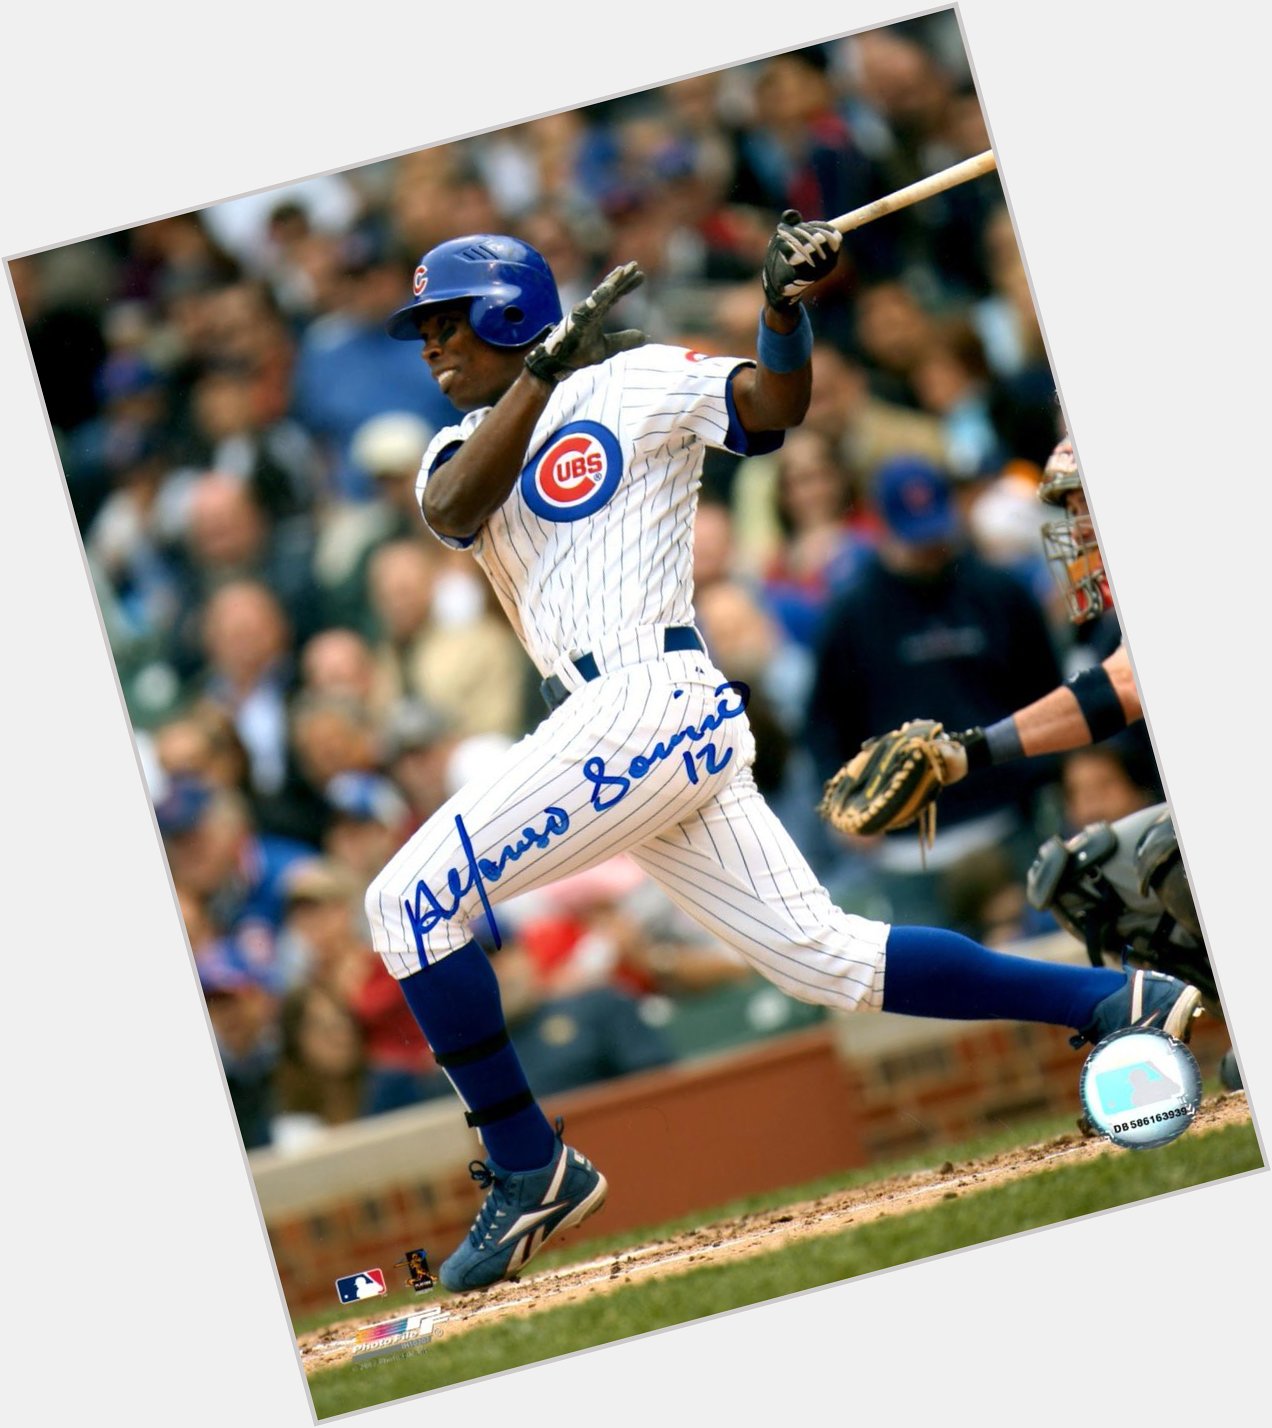 Happy birthday to Alfonso Soriano!

Smile widely and swing a big stick. 